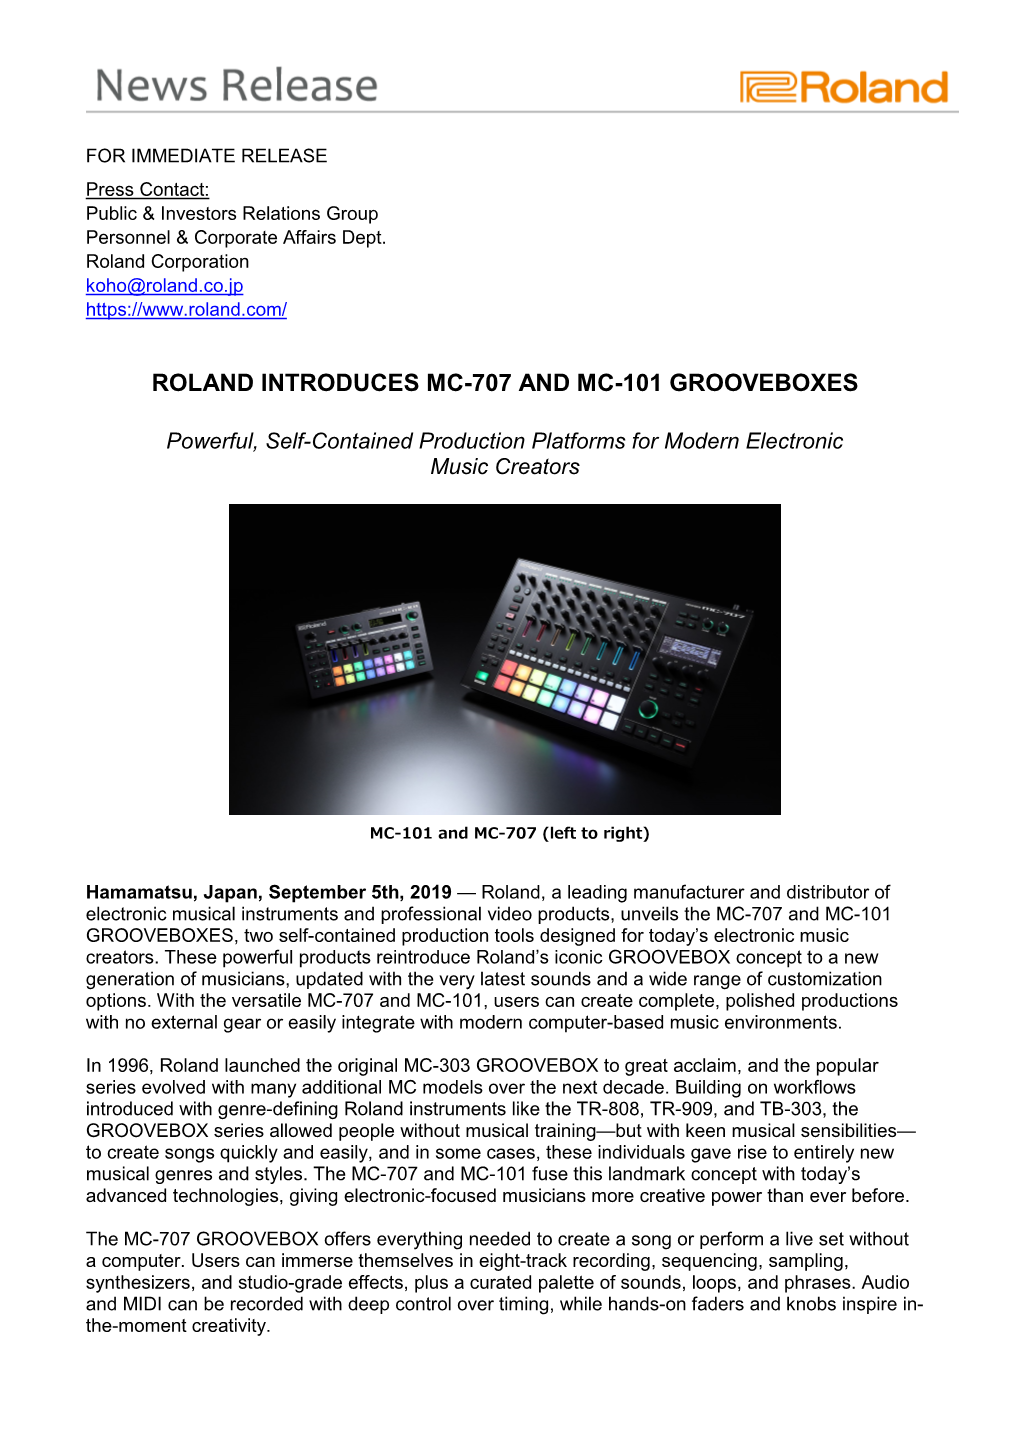 Roland Introduces Mc-707 and Mc-101 Grooveboxes